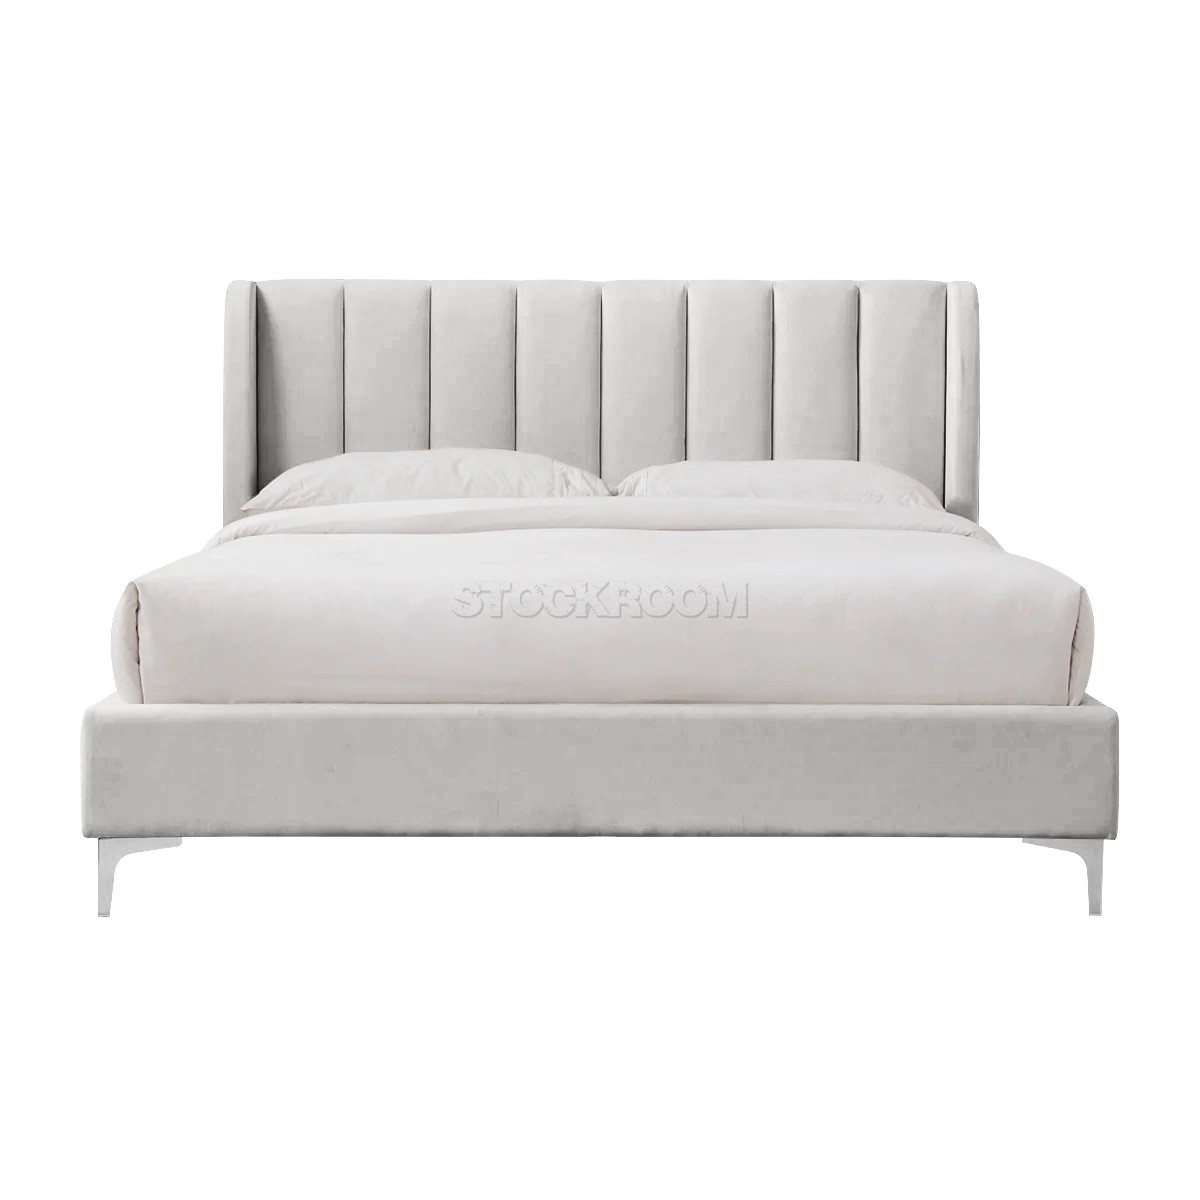 Athen Fabric Upholstered Bed Frame With Different Color Options